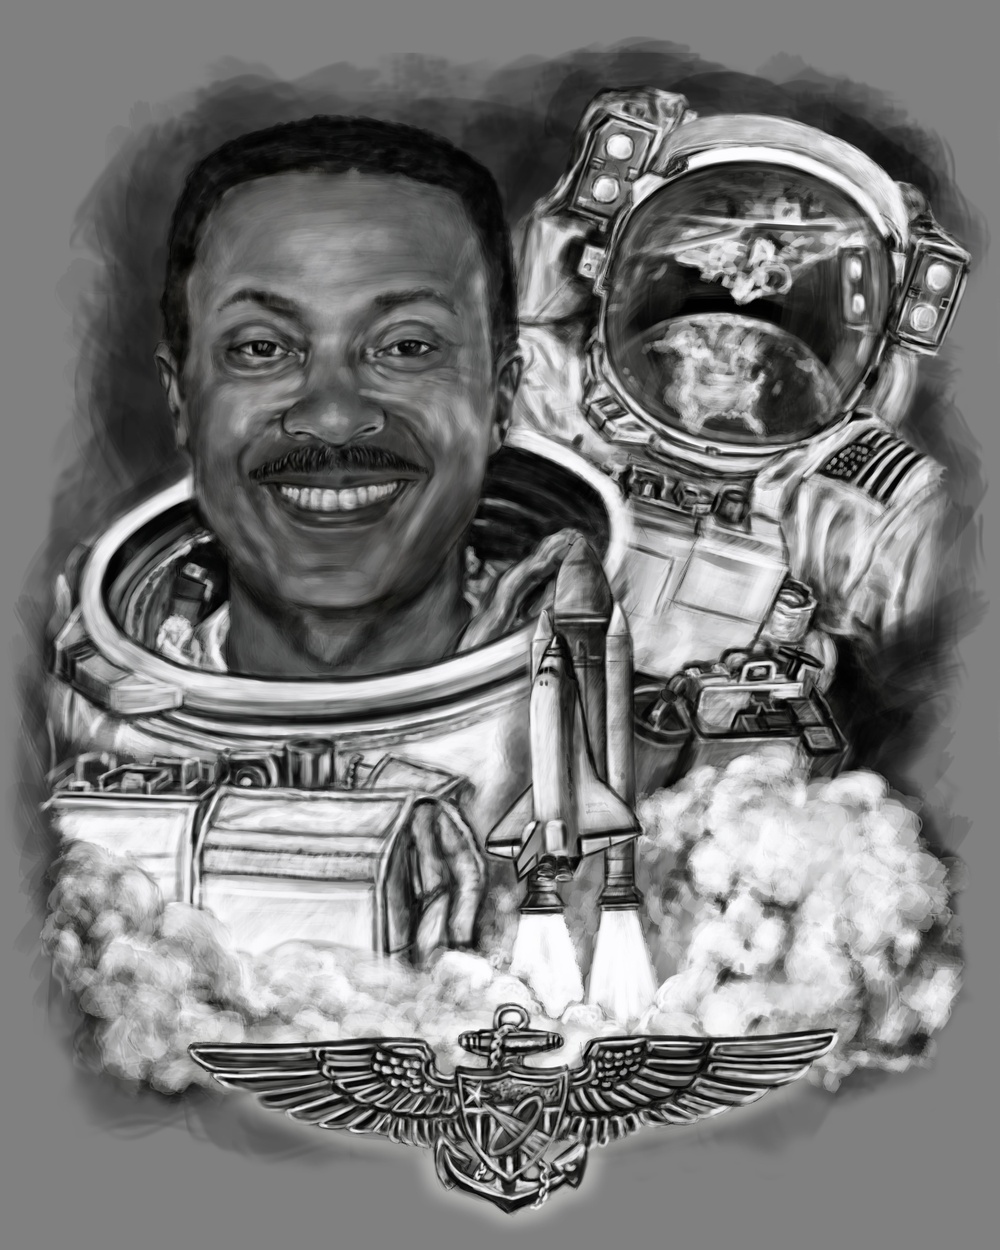 African American Firsts in US Naval History Captain Winston E. Scott Naval Astronaut